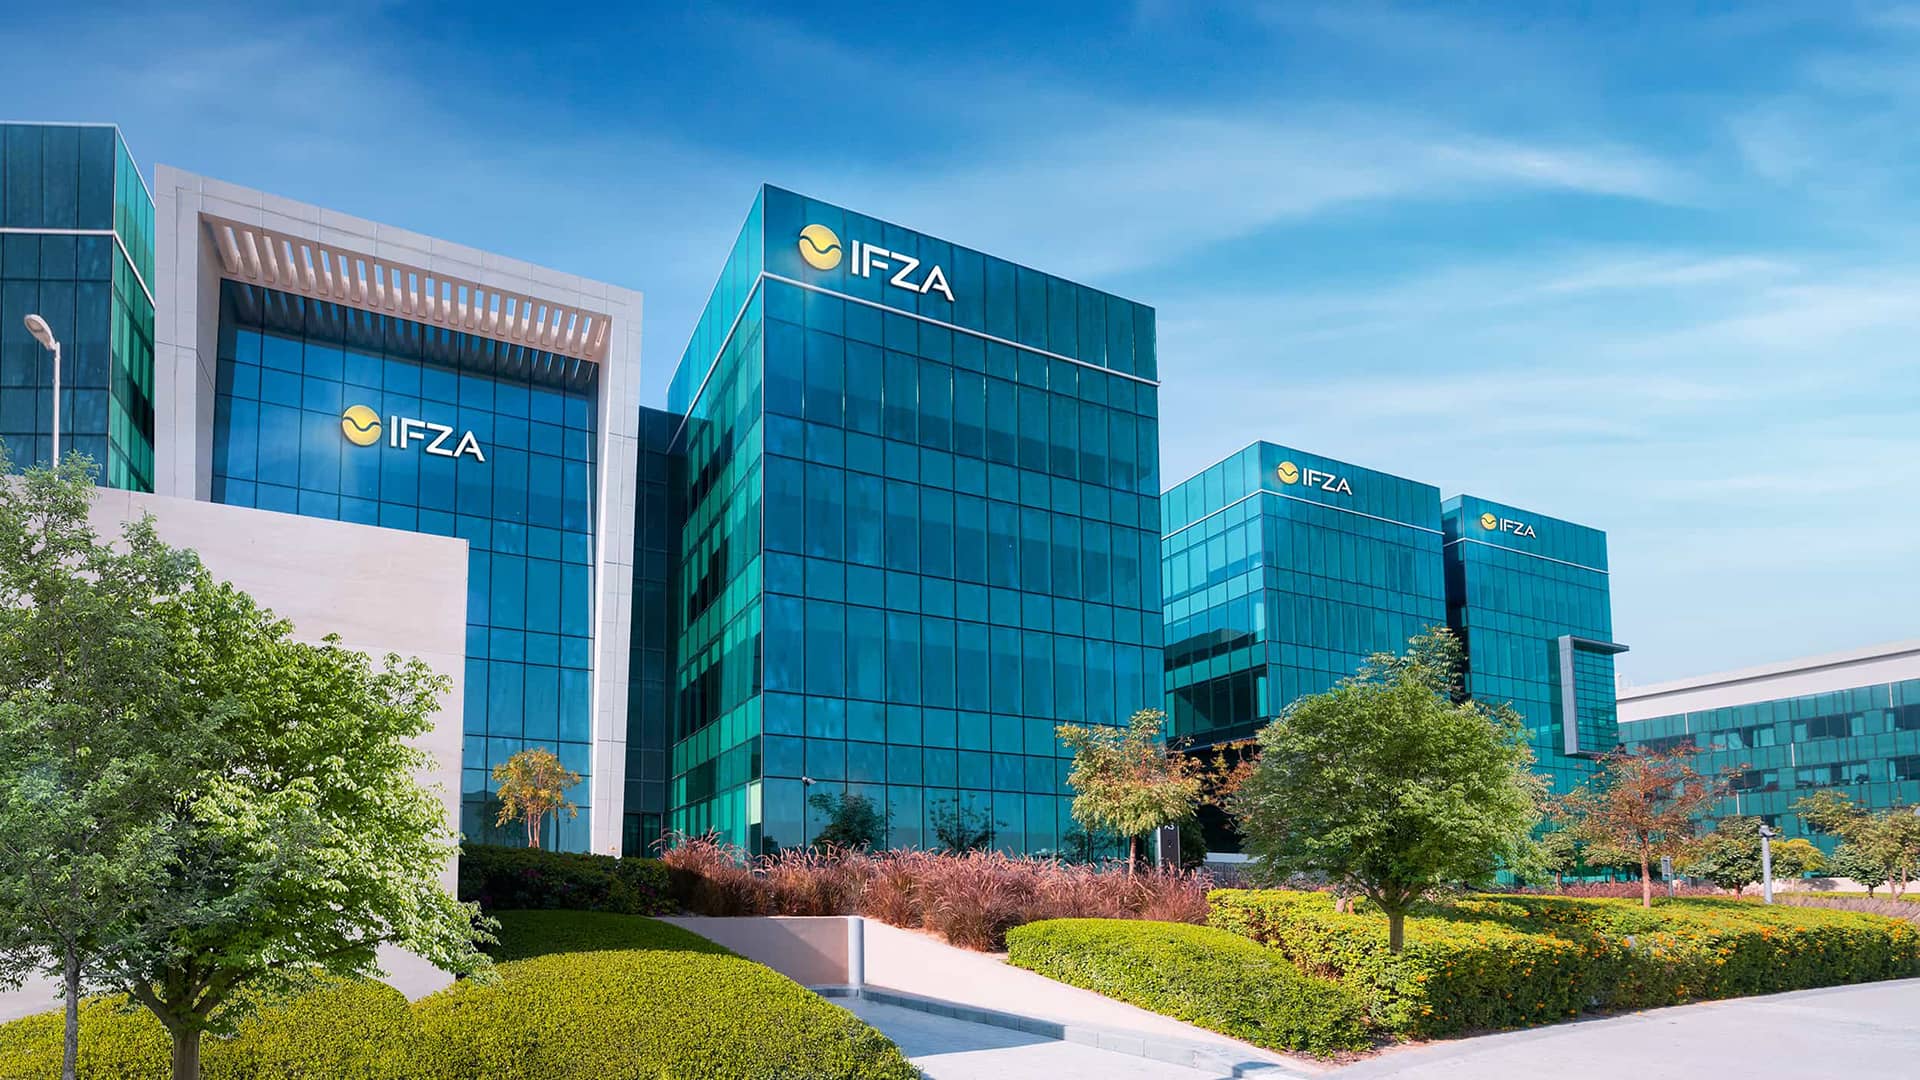 Free Zones in the UAE- IFZA